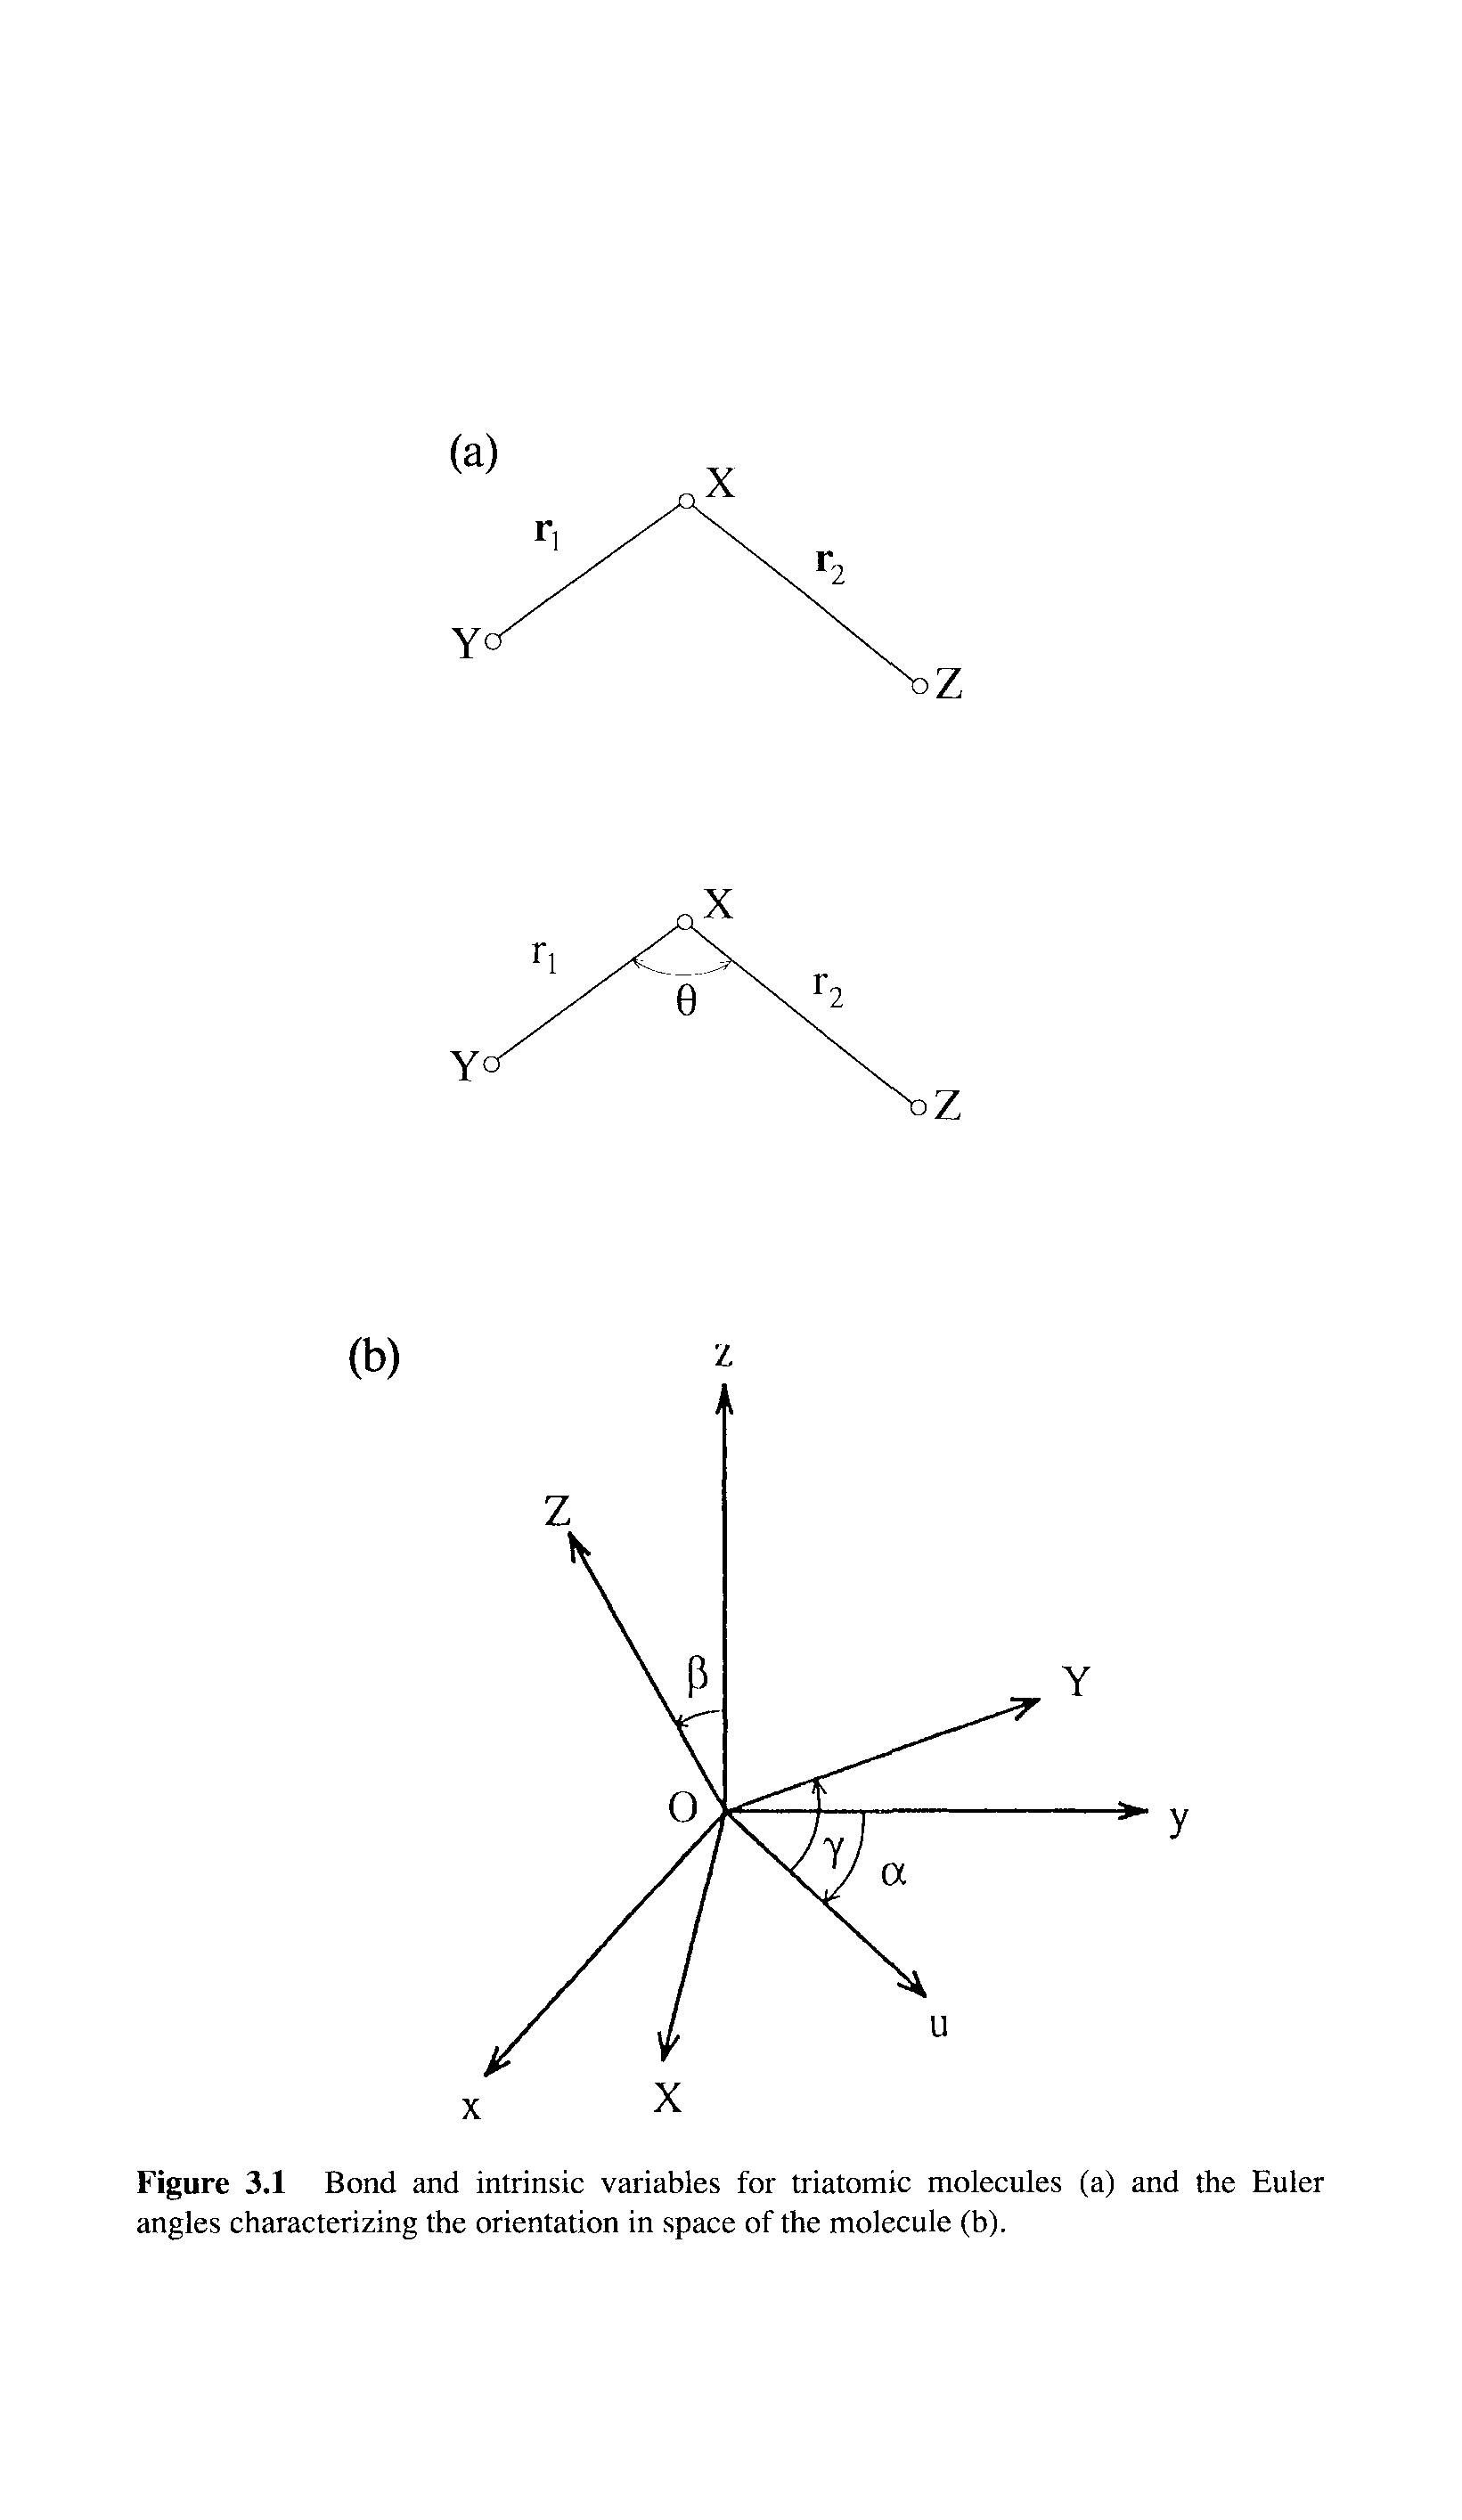 Figure 3.1 Bond and intrinsic variables for triatomic molecules (a) and the Euler angles characterizing the orientation in space of the molecule (b).